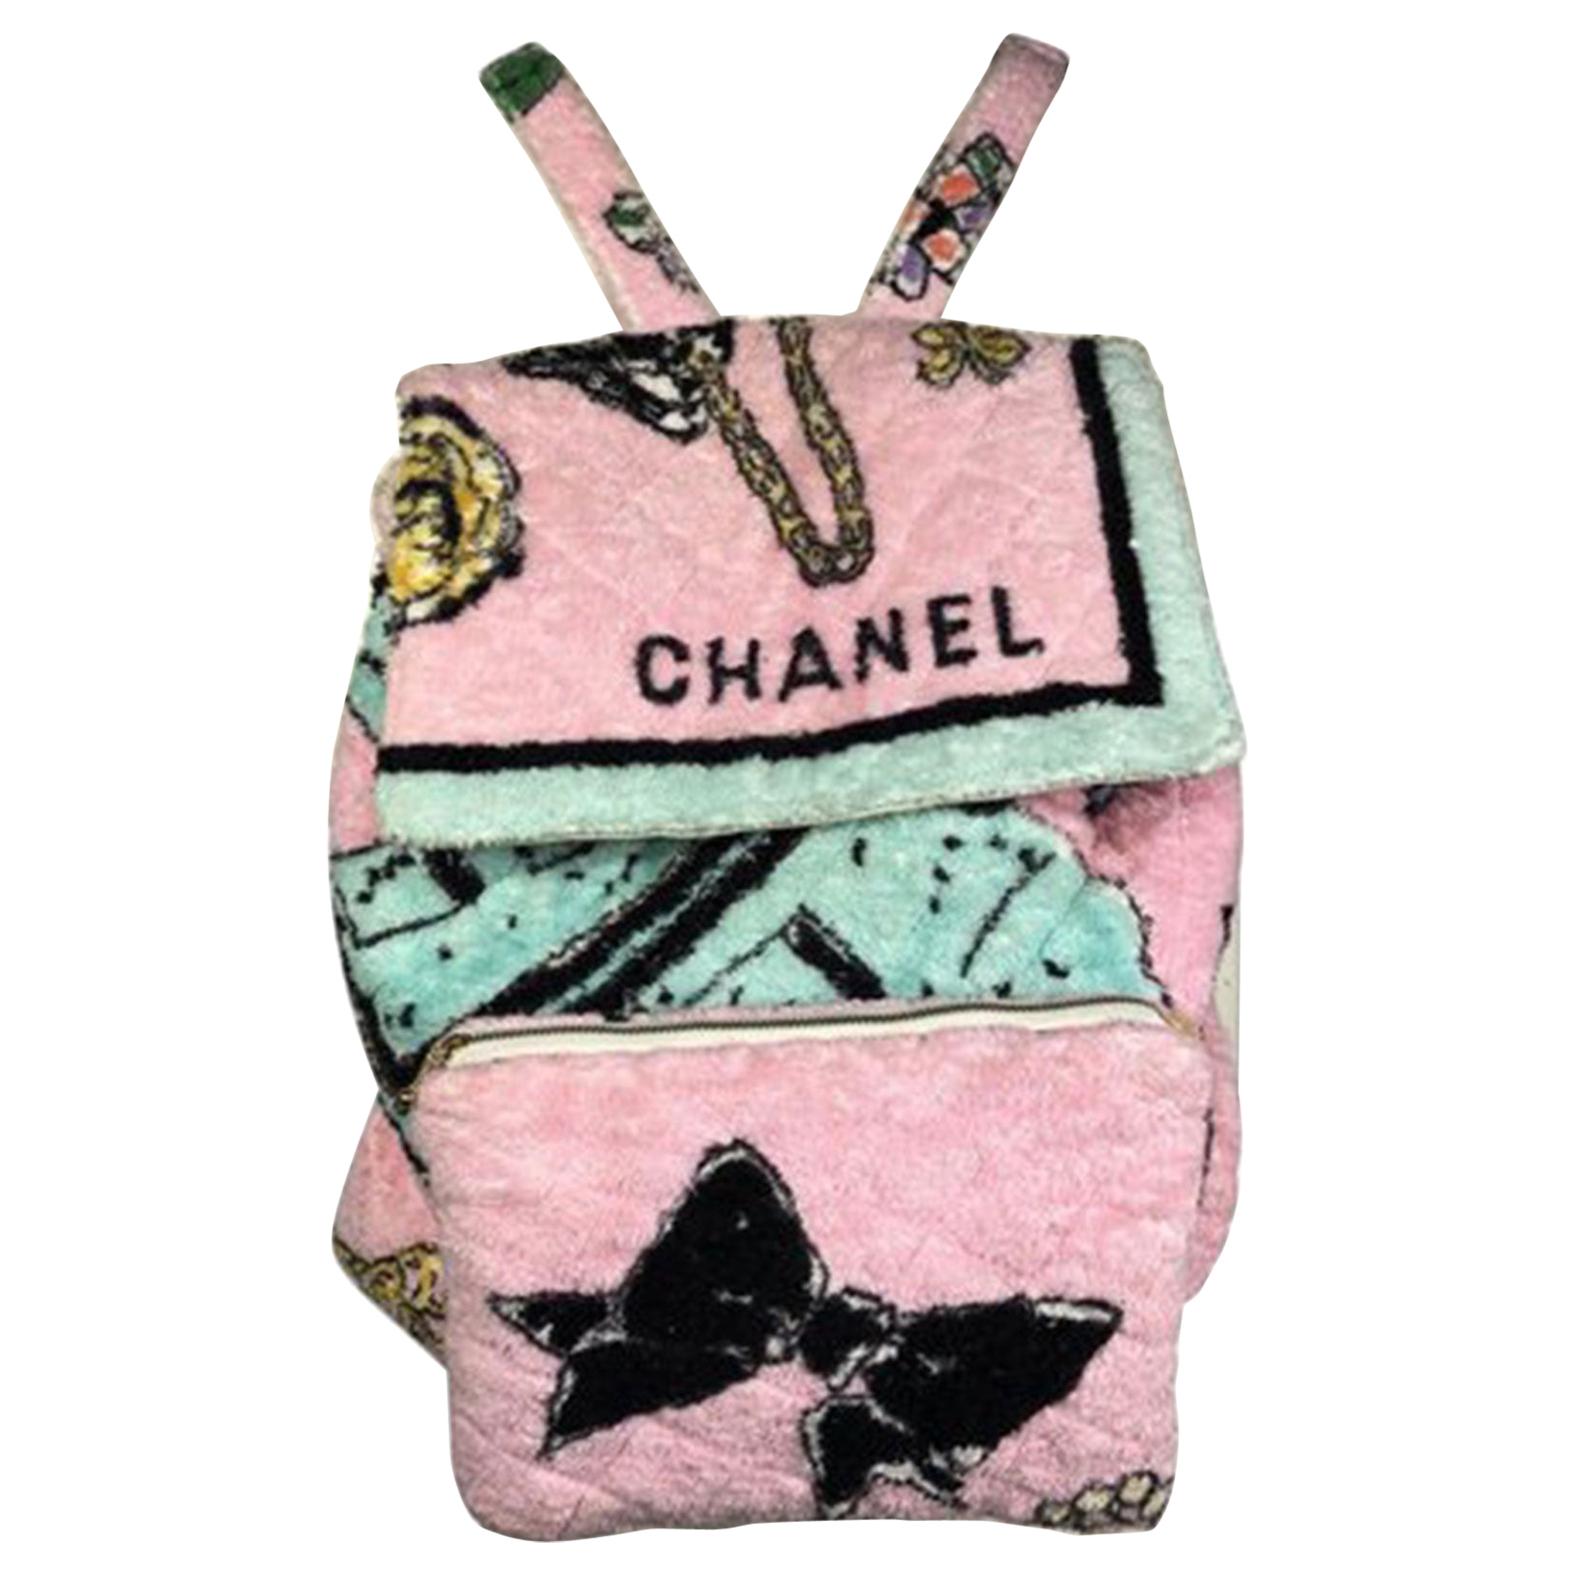 chanel terry cloth bag pink